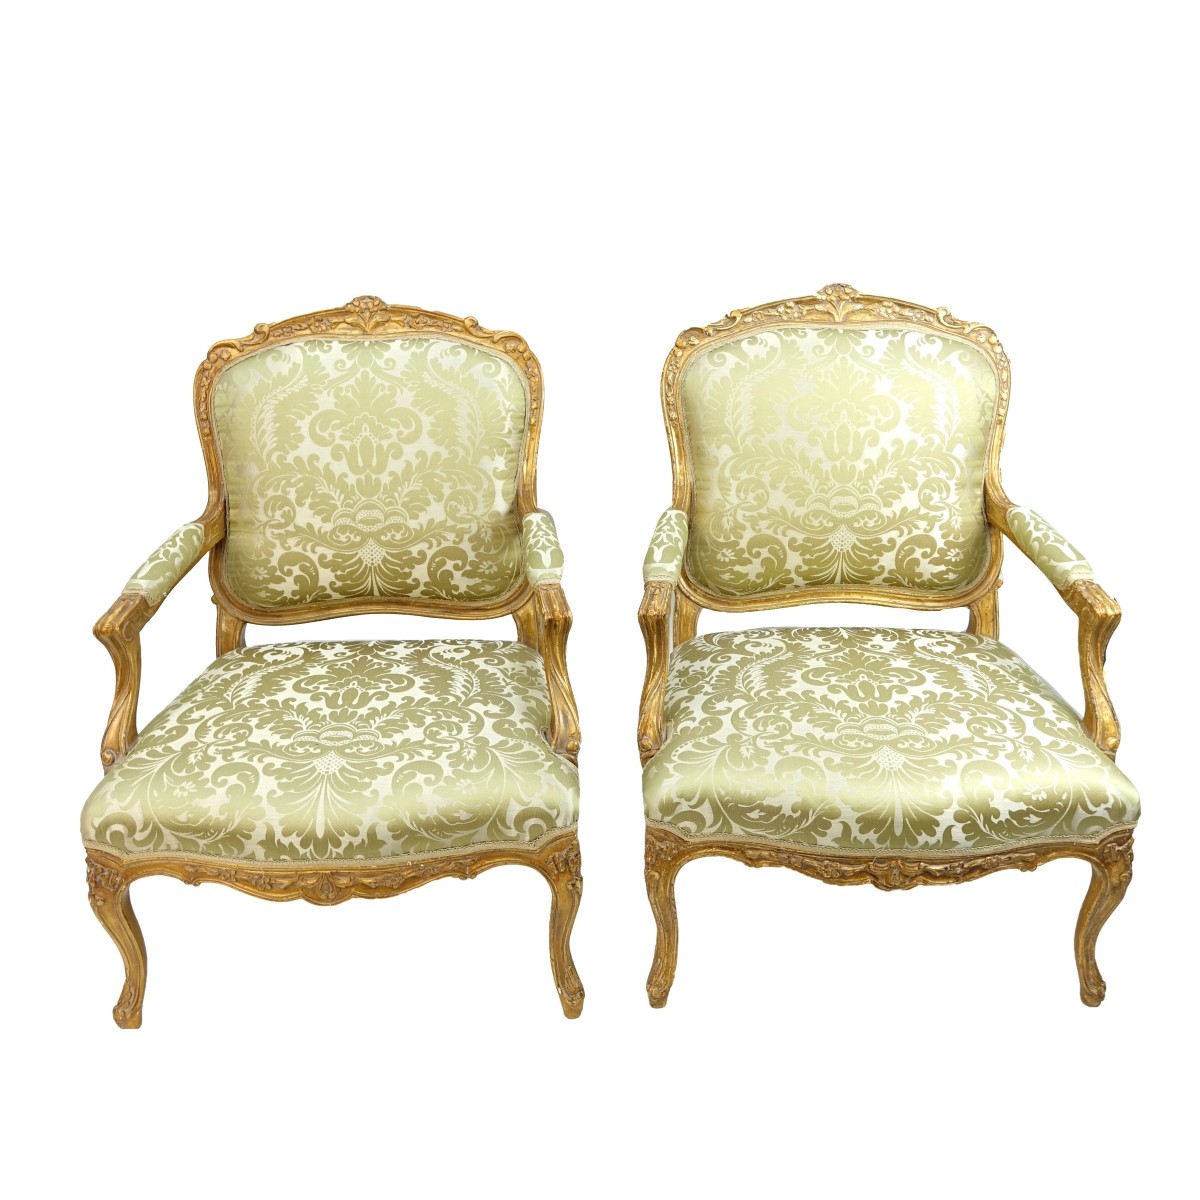 Pair of French Style Fauteuil Chairs